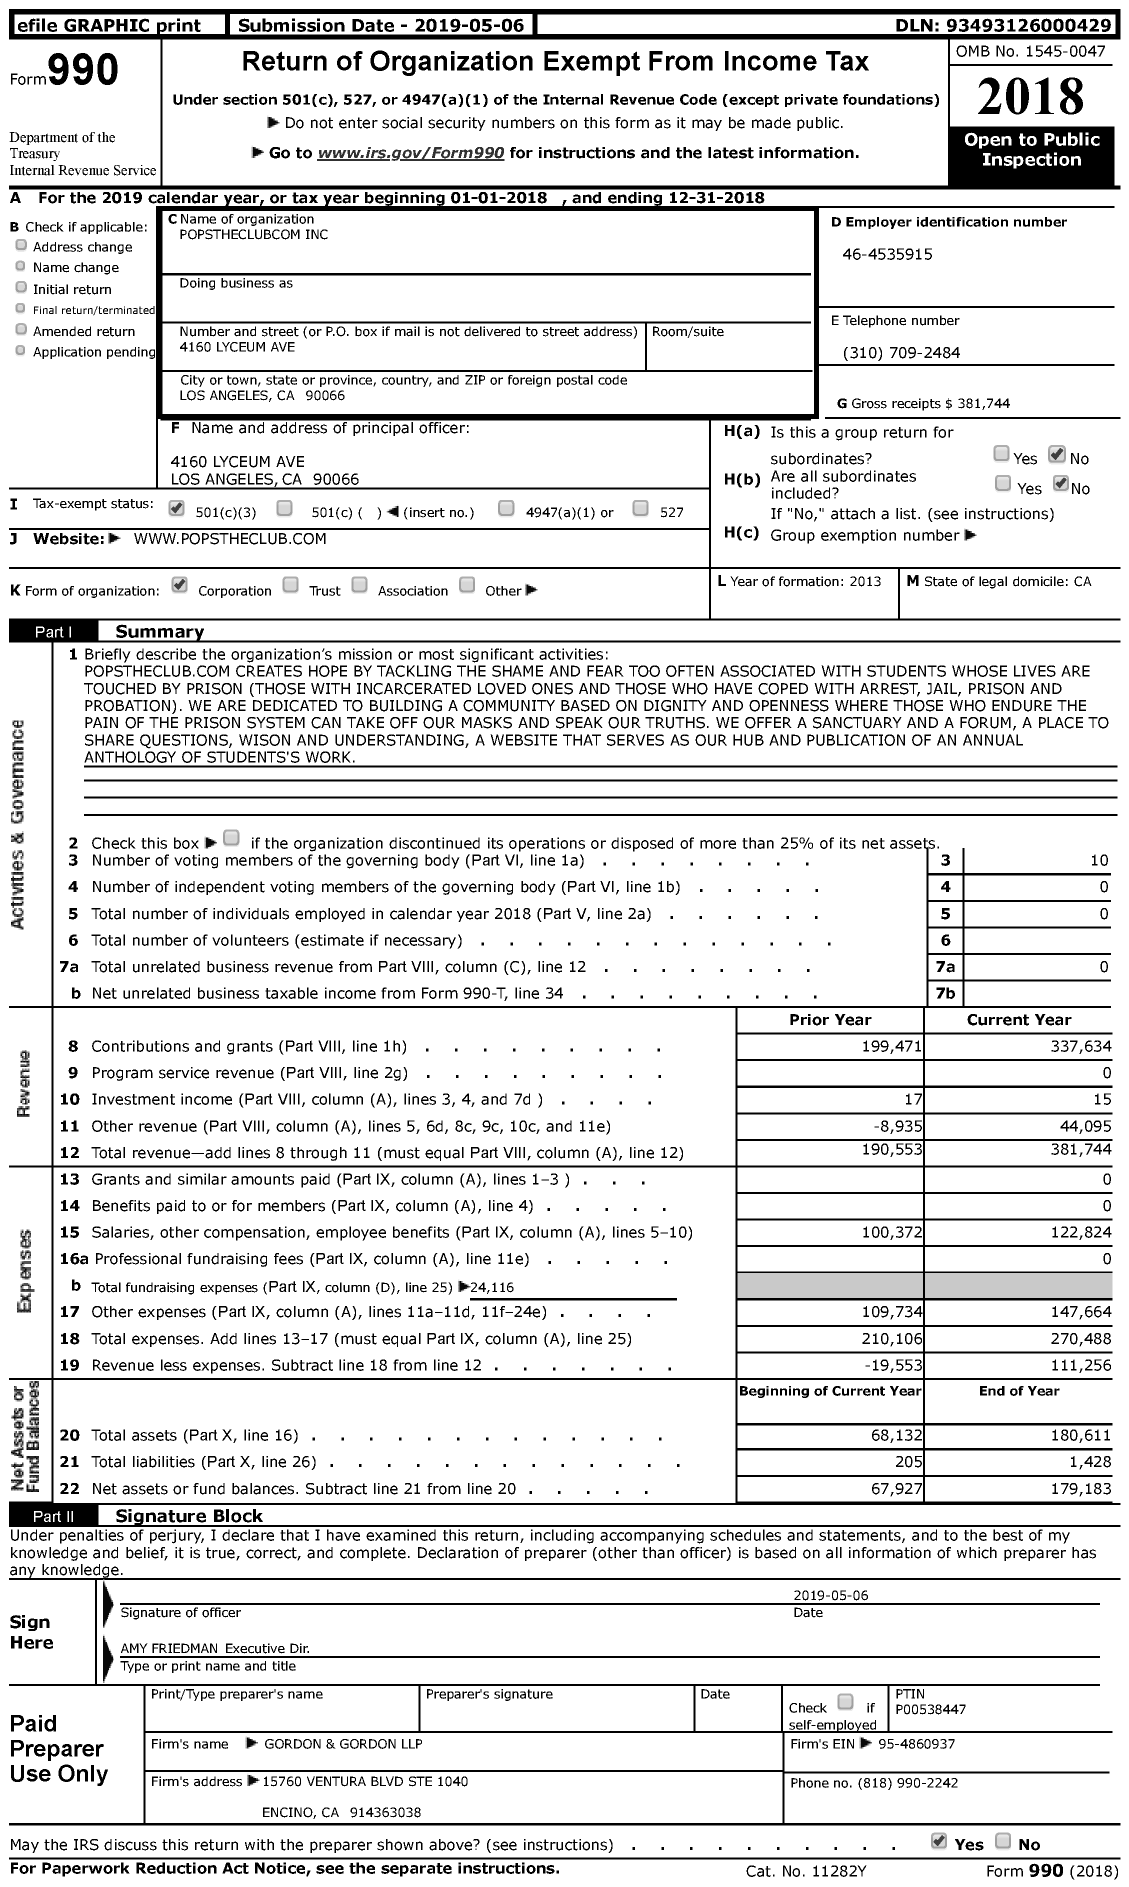 Image of first page of 2018 Form 990 for Popstheclubcom